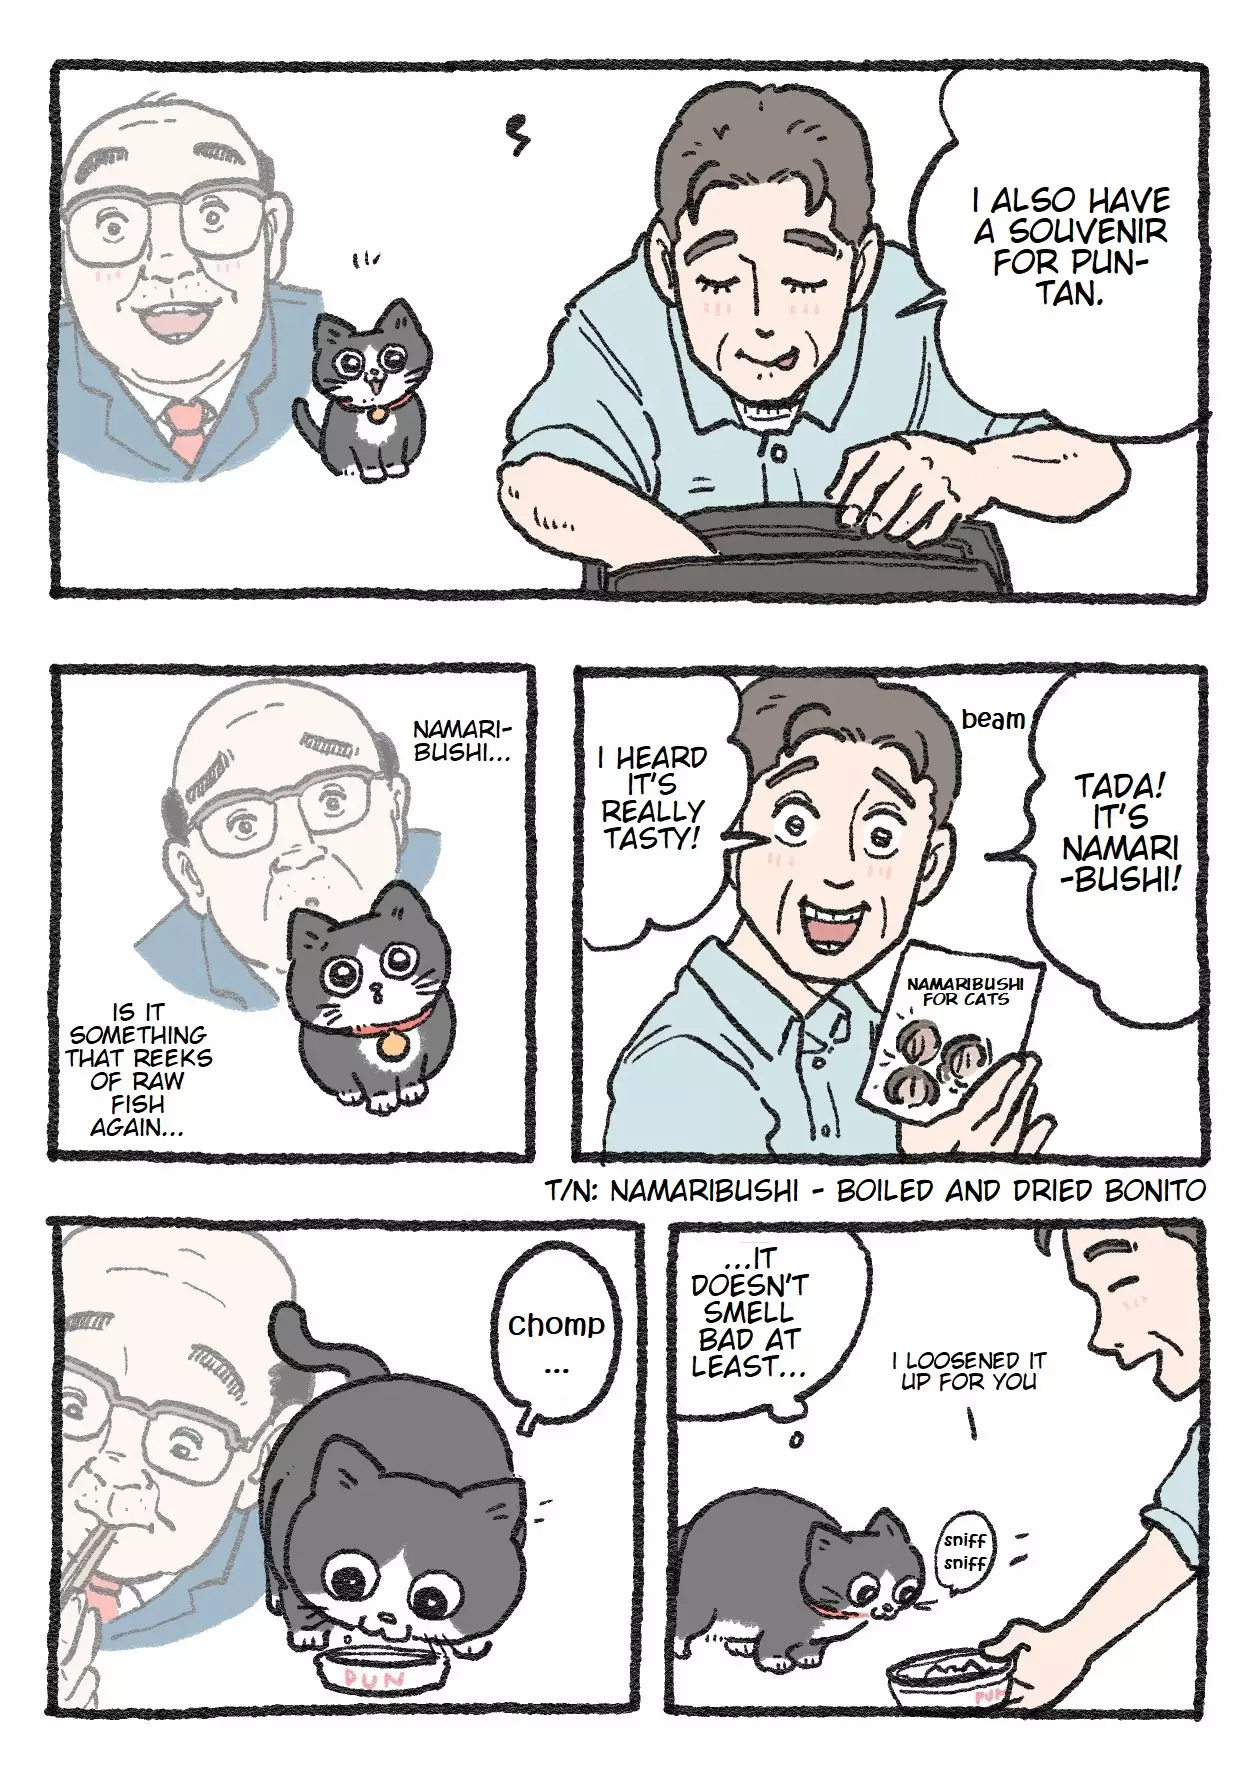 The Old Man Who Was Reincarnated As A Cat - 60 page 1-78409f85